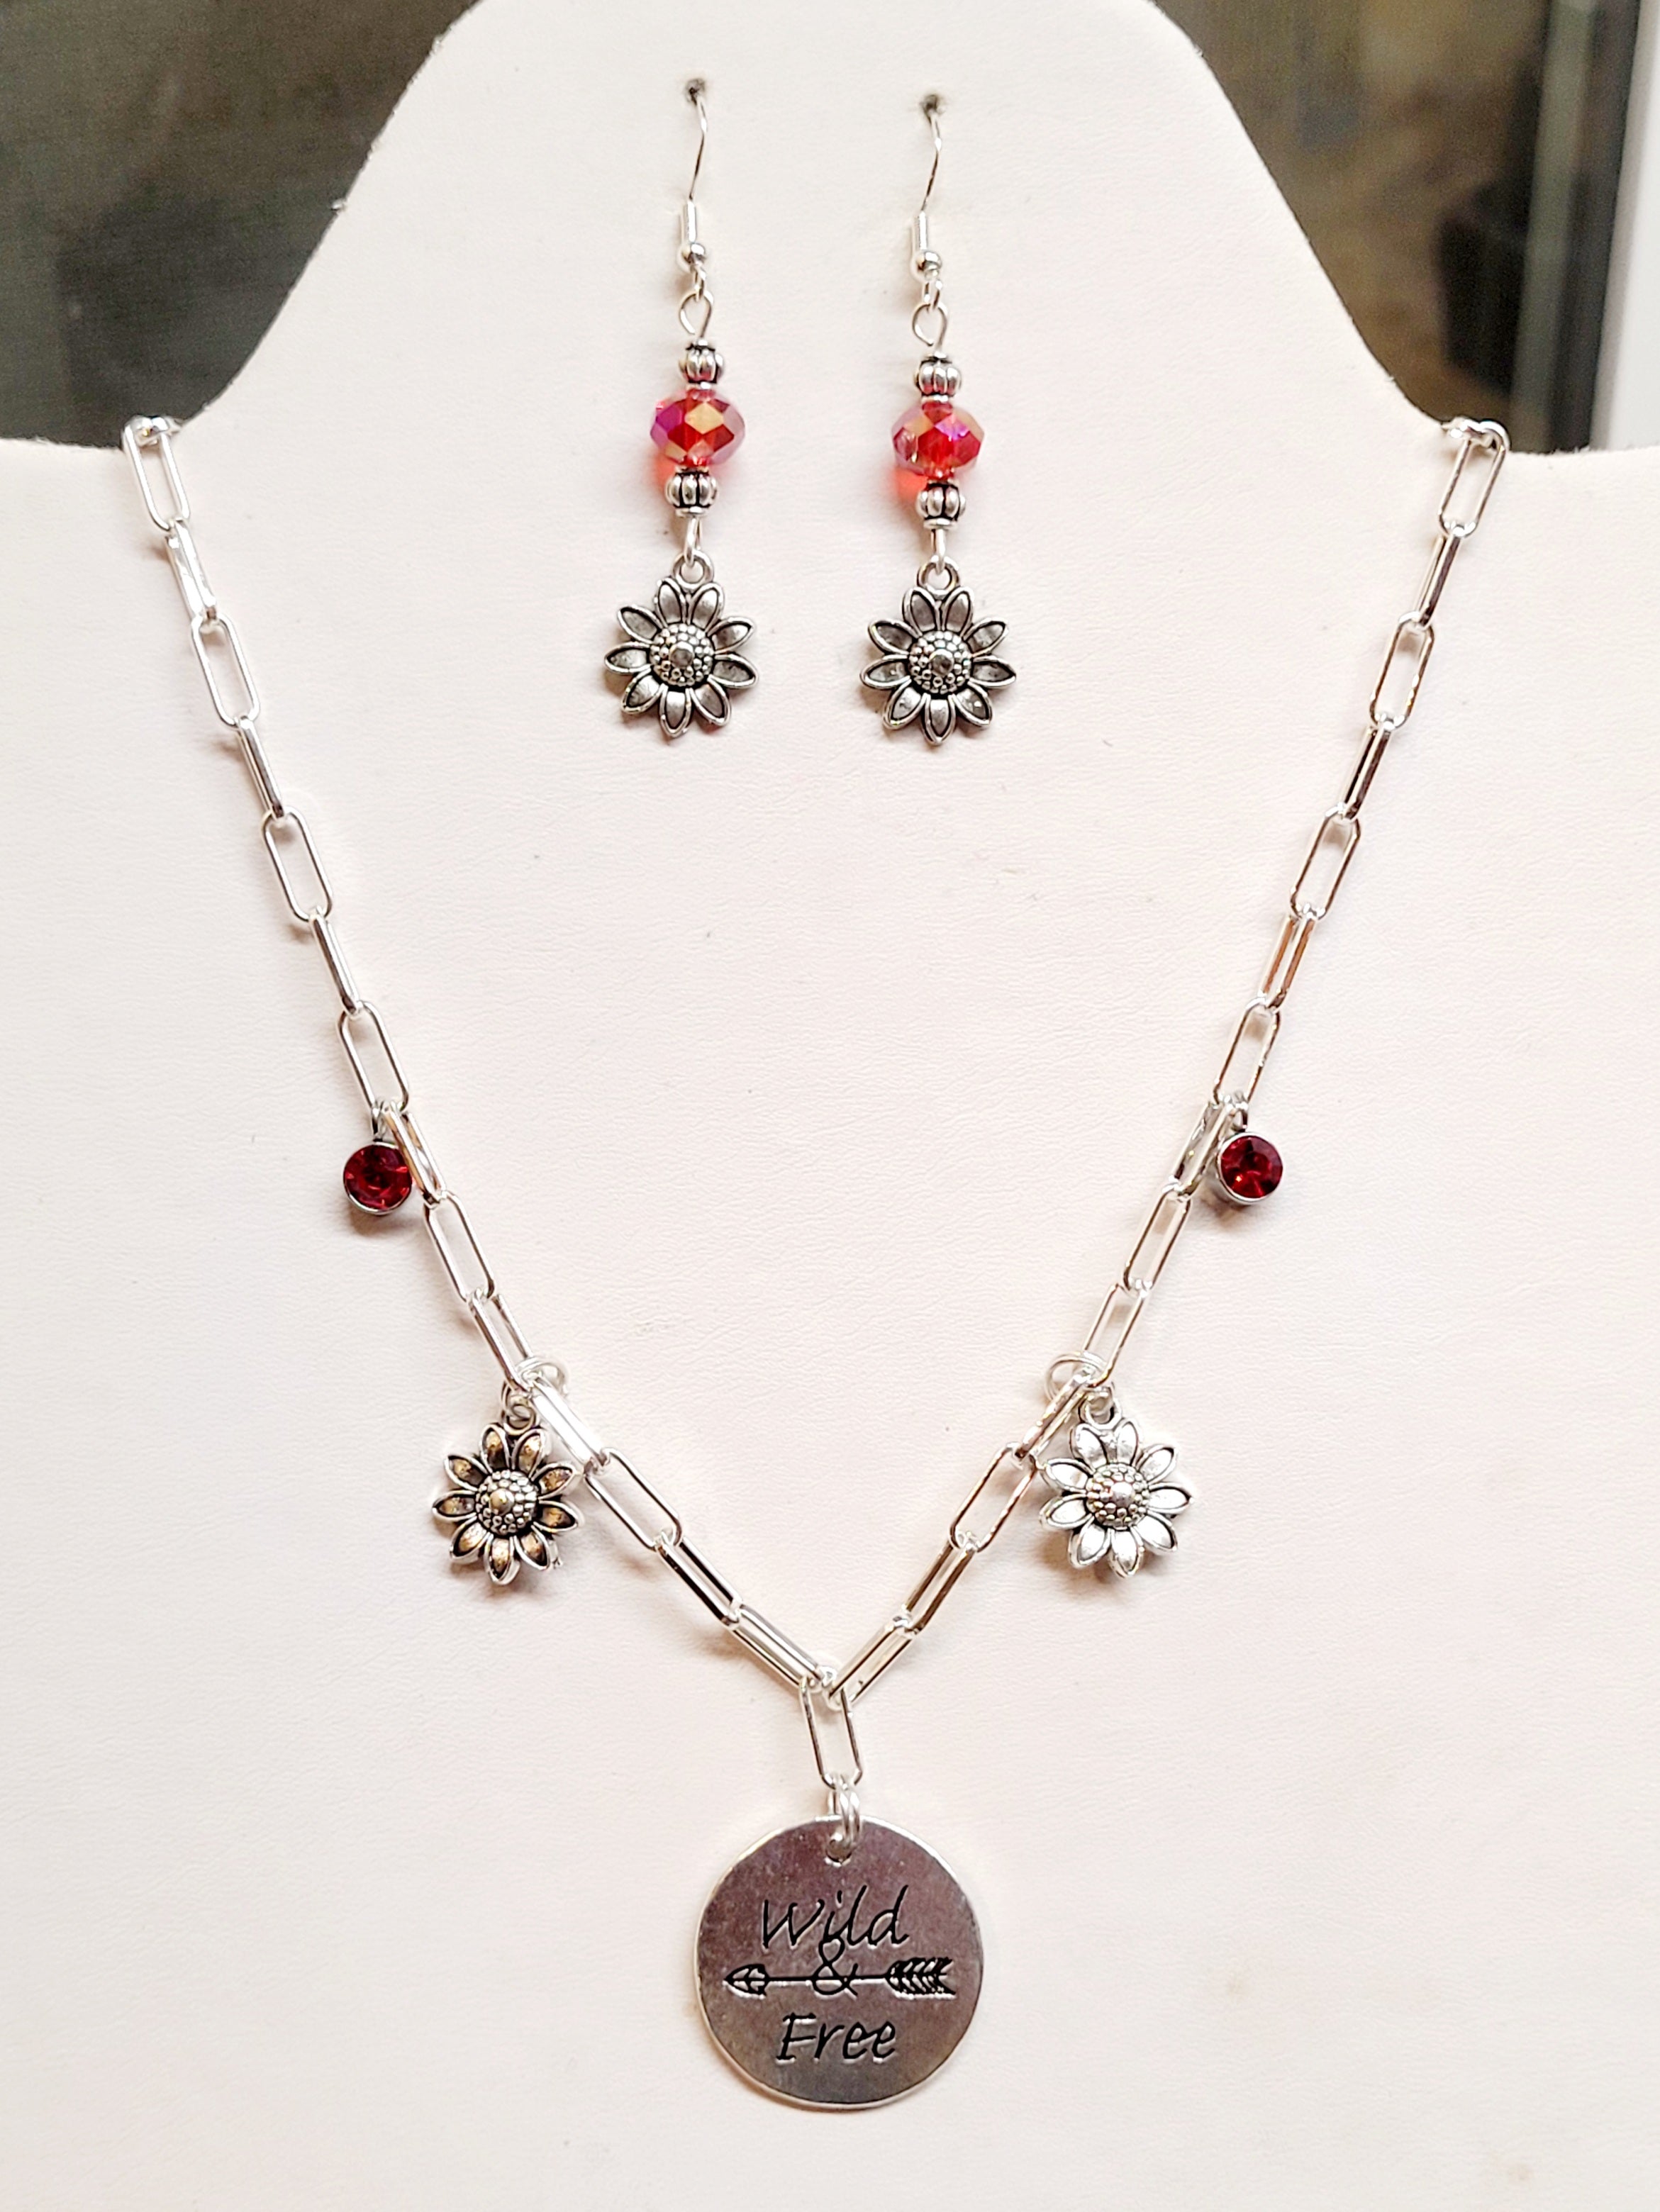 Wild & Free Necklace and Earring Set